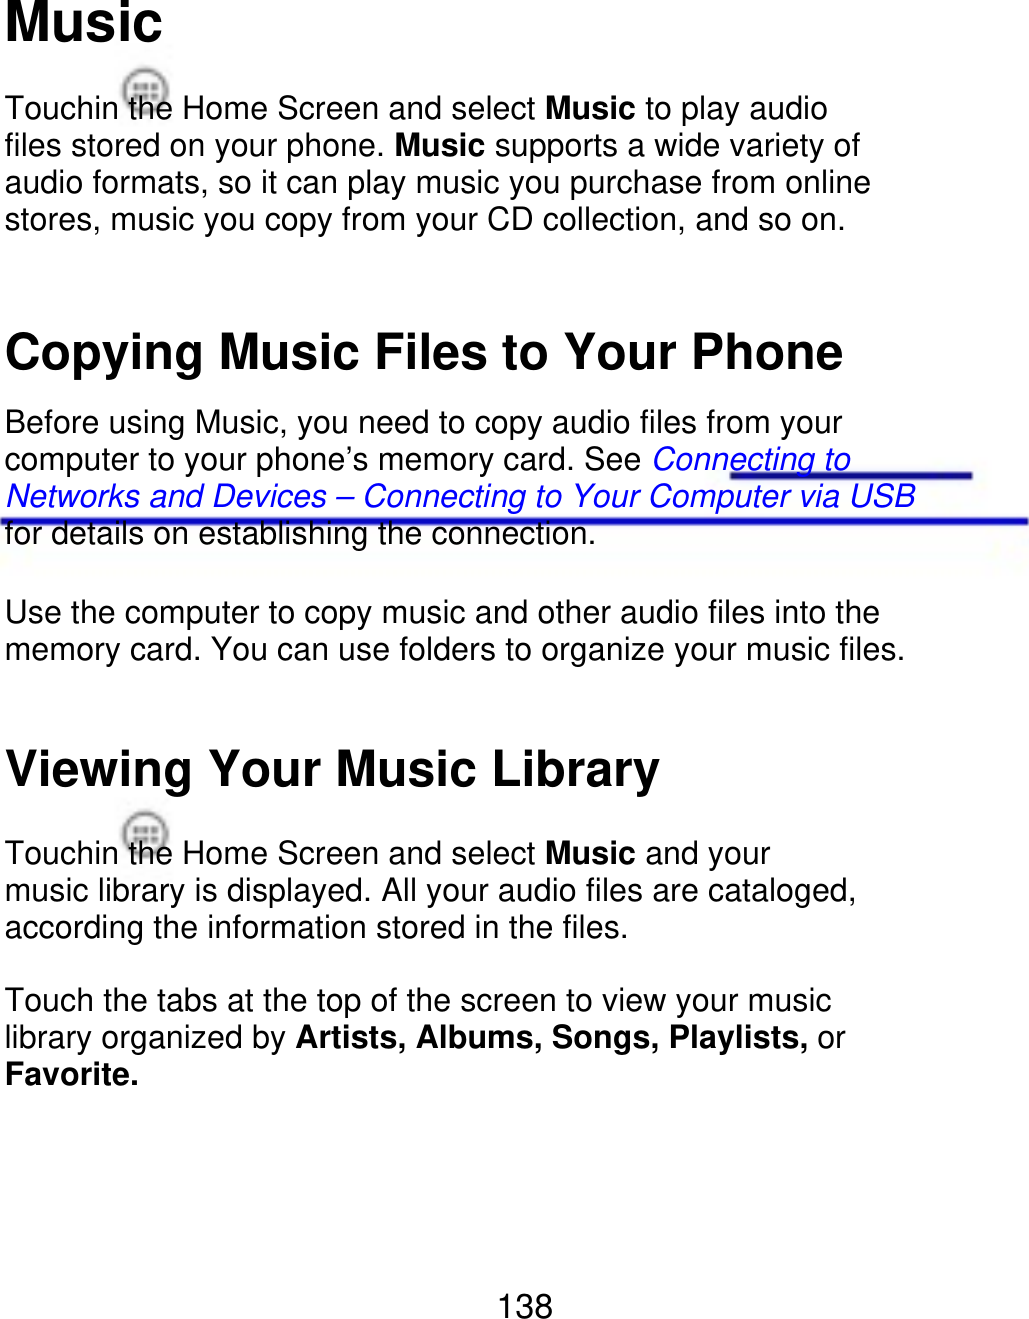 Music Touchin the Home Screen and select Music to play audio files stored on your phone. Music supports a wide variety of audio formats, so it can play music you purchase from online stores, music you copy from your CD collection, and so on. Copying Music Files to Your Phone Before using Music, you need to copy audio files from your computer to your phone’s memory card. See Connecting to Networks and Devices – Connecting to Your Computer via USB for details on establishing the connection. Use the computer to copy music and other audio files into the memory card. You can use folders to organize your music files. Viewing Your Music Library Touchin the Home Screen and select Music and your music library is displayed. All your audio files are cataloged, according the information stored in the files. Touch the tabs at the top of the screen to view your music library organized by Artists, Albums, Songs, Playlists, or Favorite. 138 